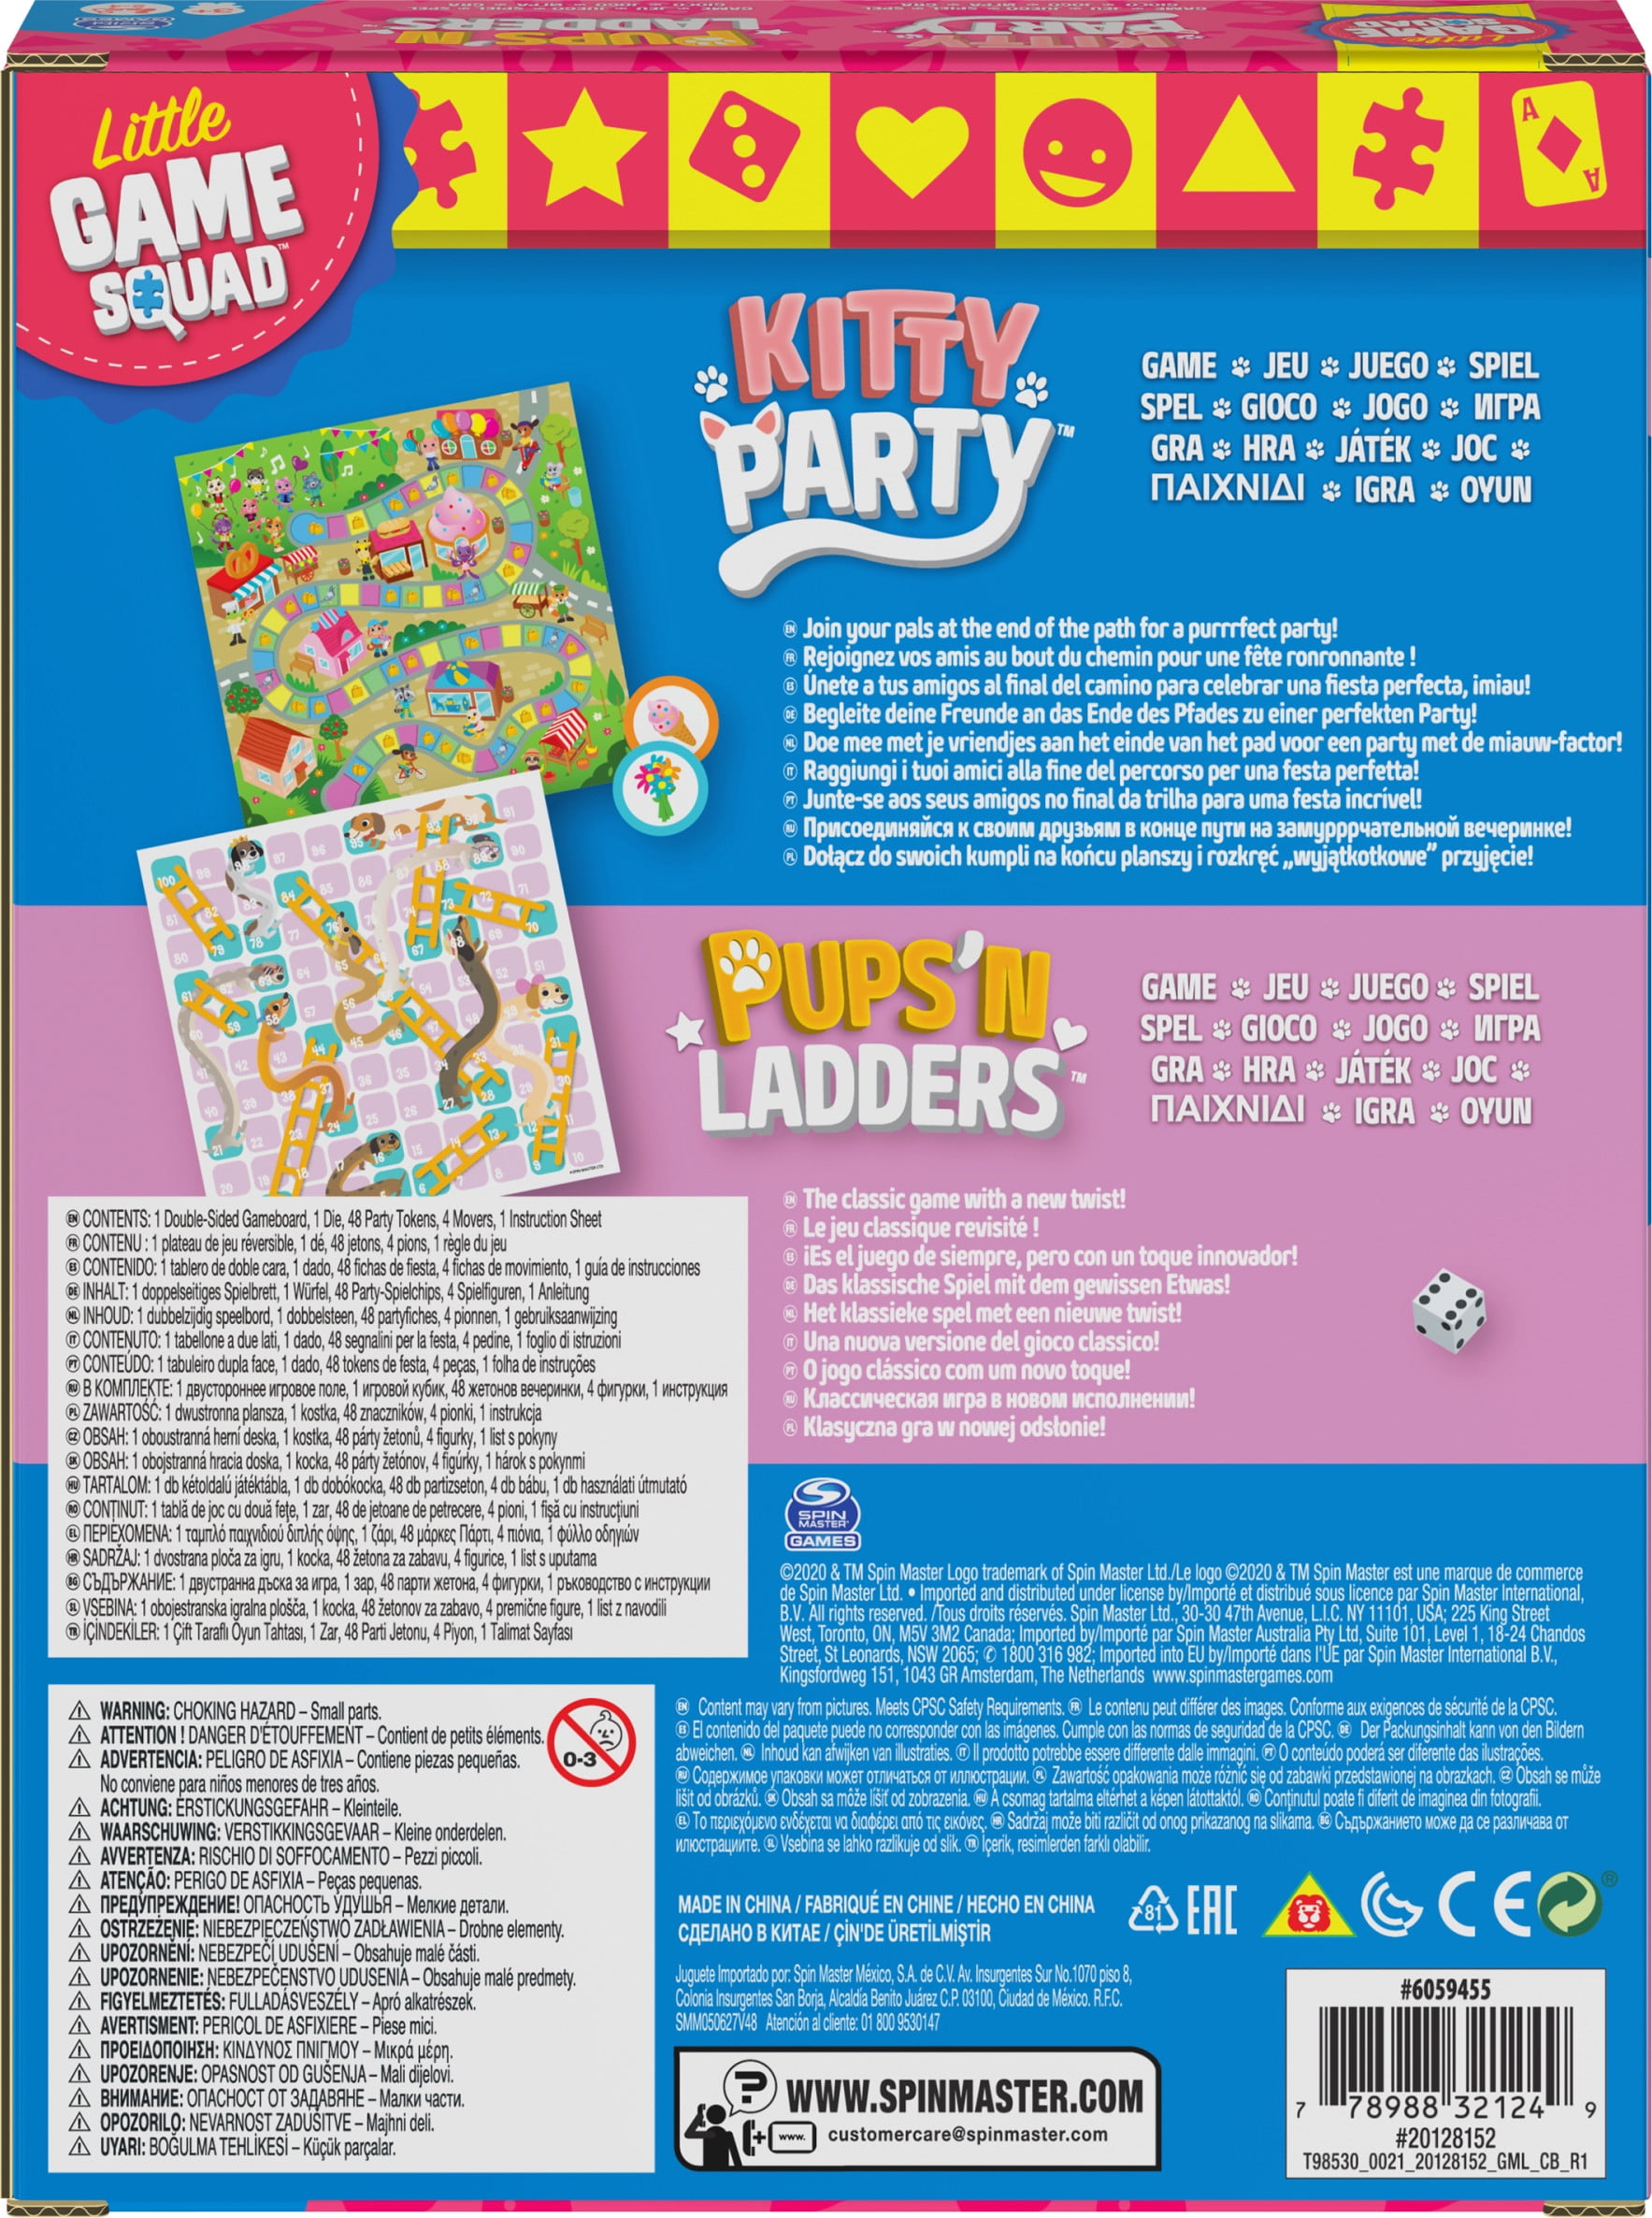 Kitty Party and Pups 'n Ladders Board Games, for Families and Kids